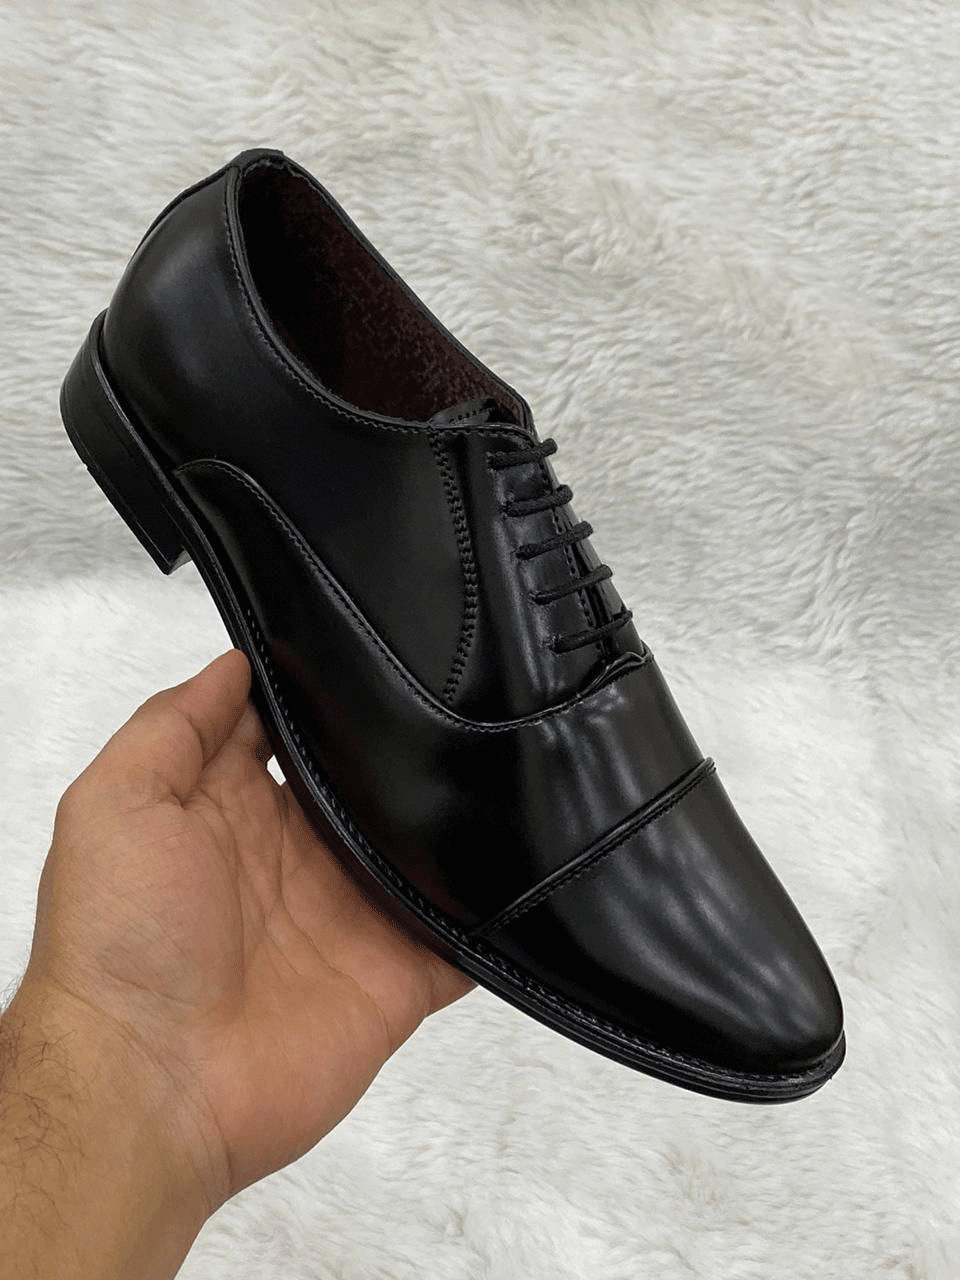 Shiny Mens Wear Pattern Premium Design Quality Oxford Formal Shoes-Unique and Classy